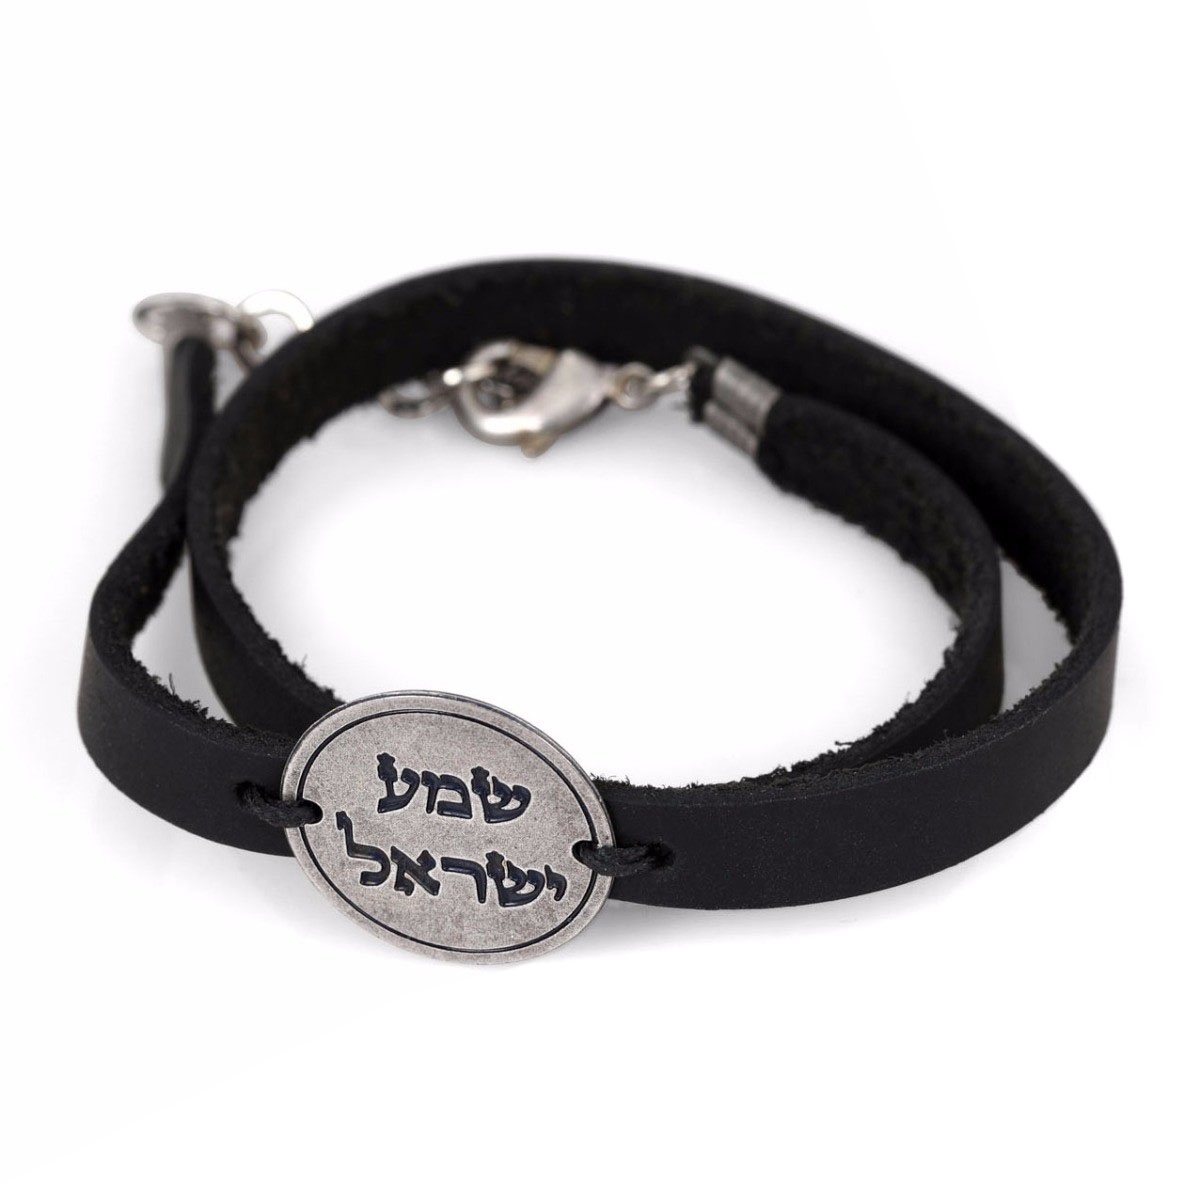 Galis Jewelry Shema Yisrael Double Wrap Black Leather Men’s Bracelet with Silver Plated Disc  - 1